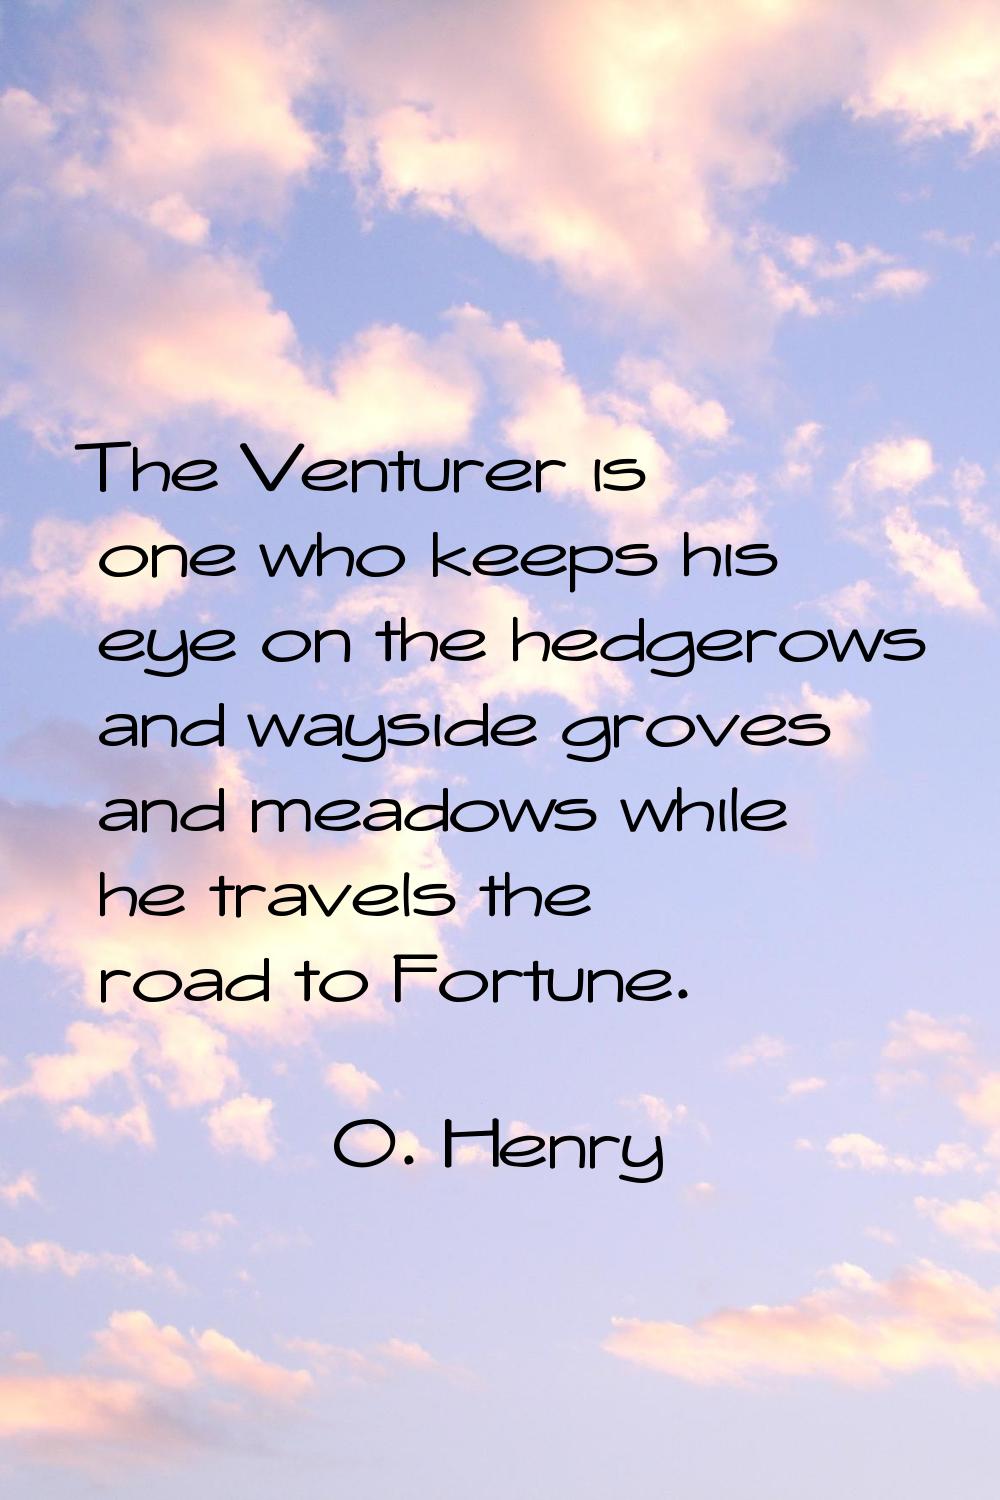 The Venturer is one who keeps his eye on the hedgerows and wayside groves and meadows while he trav